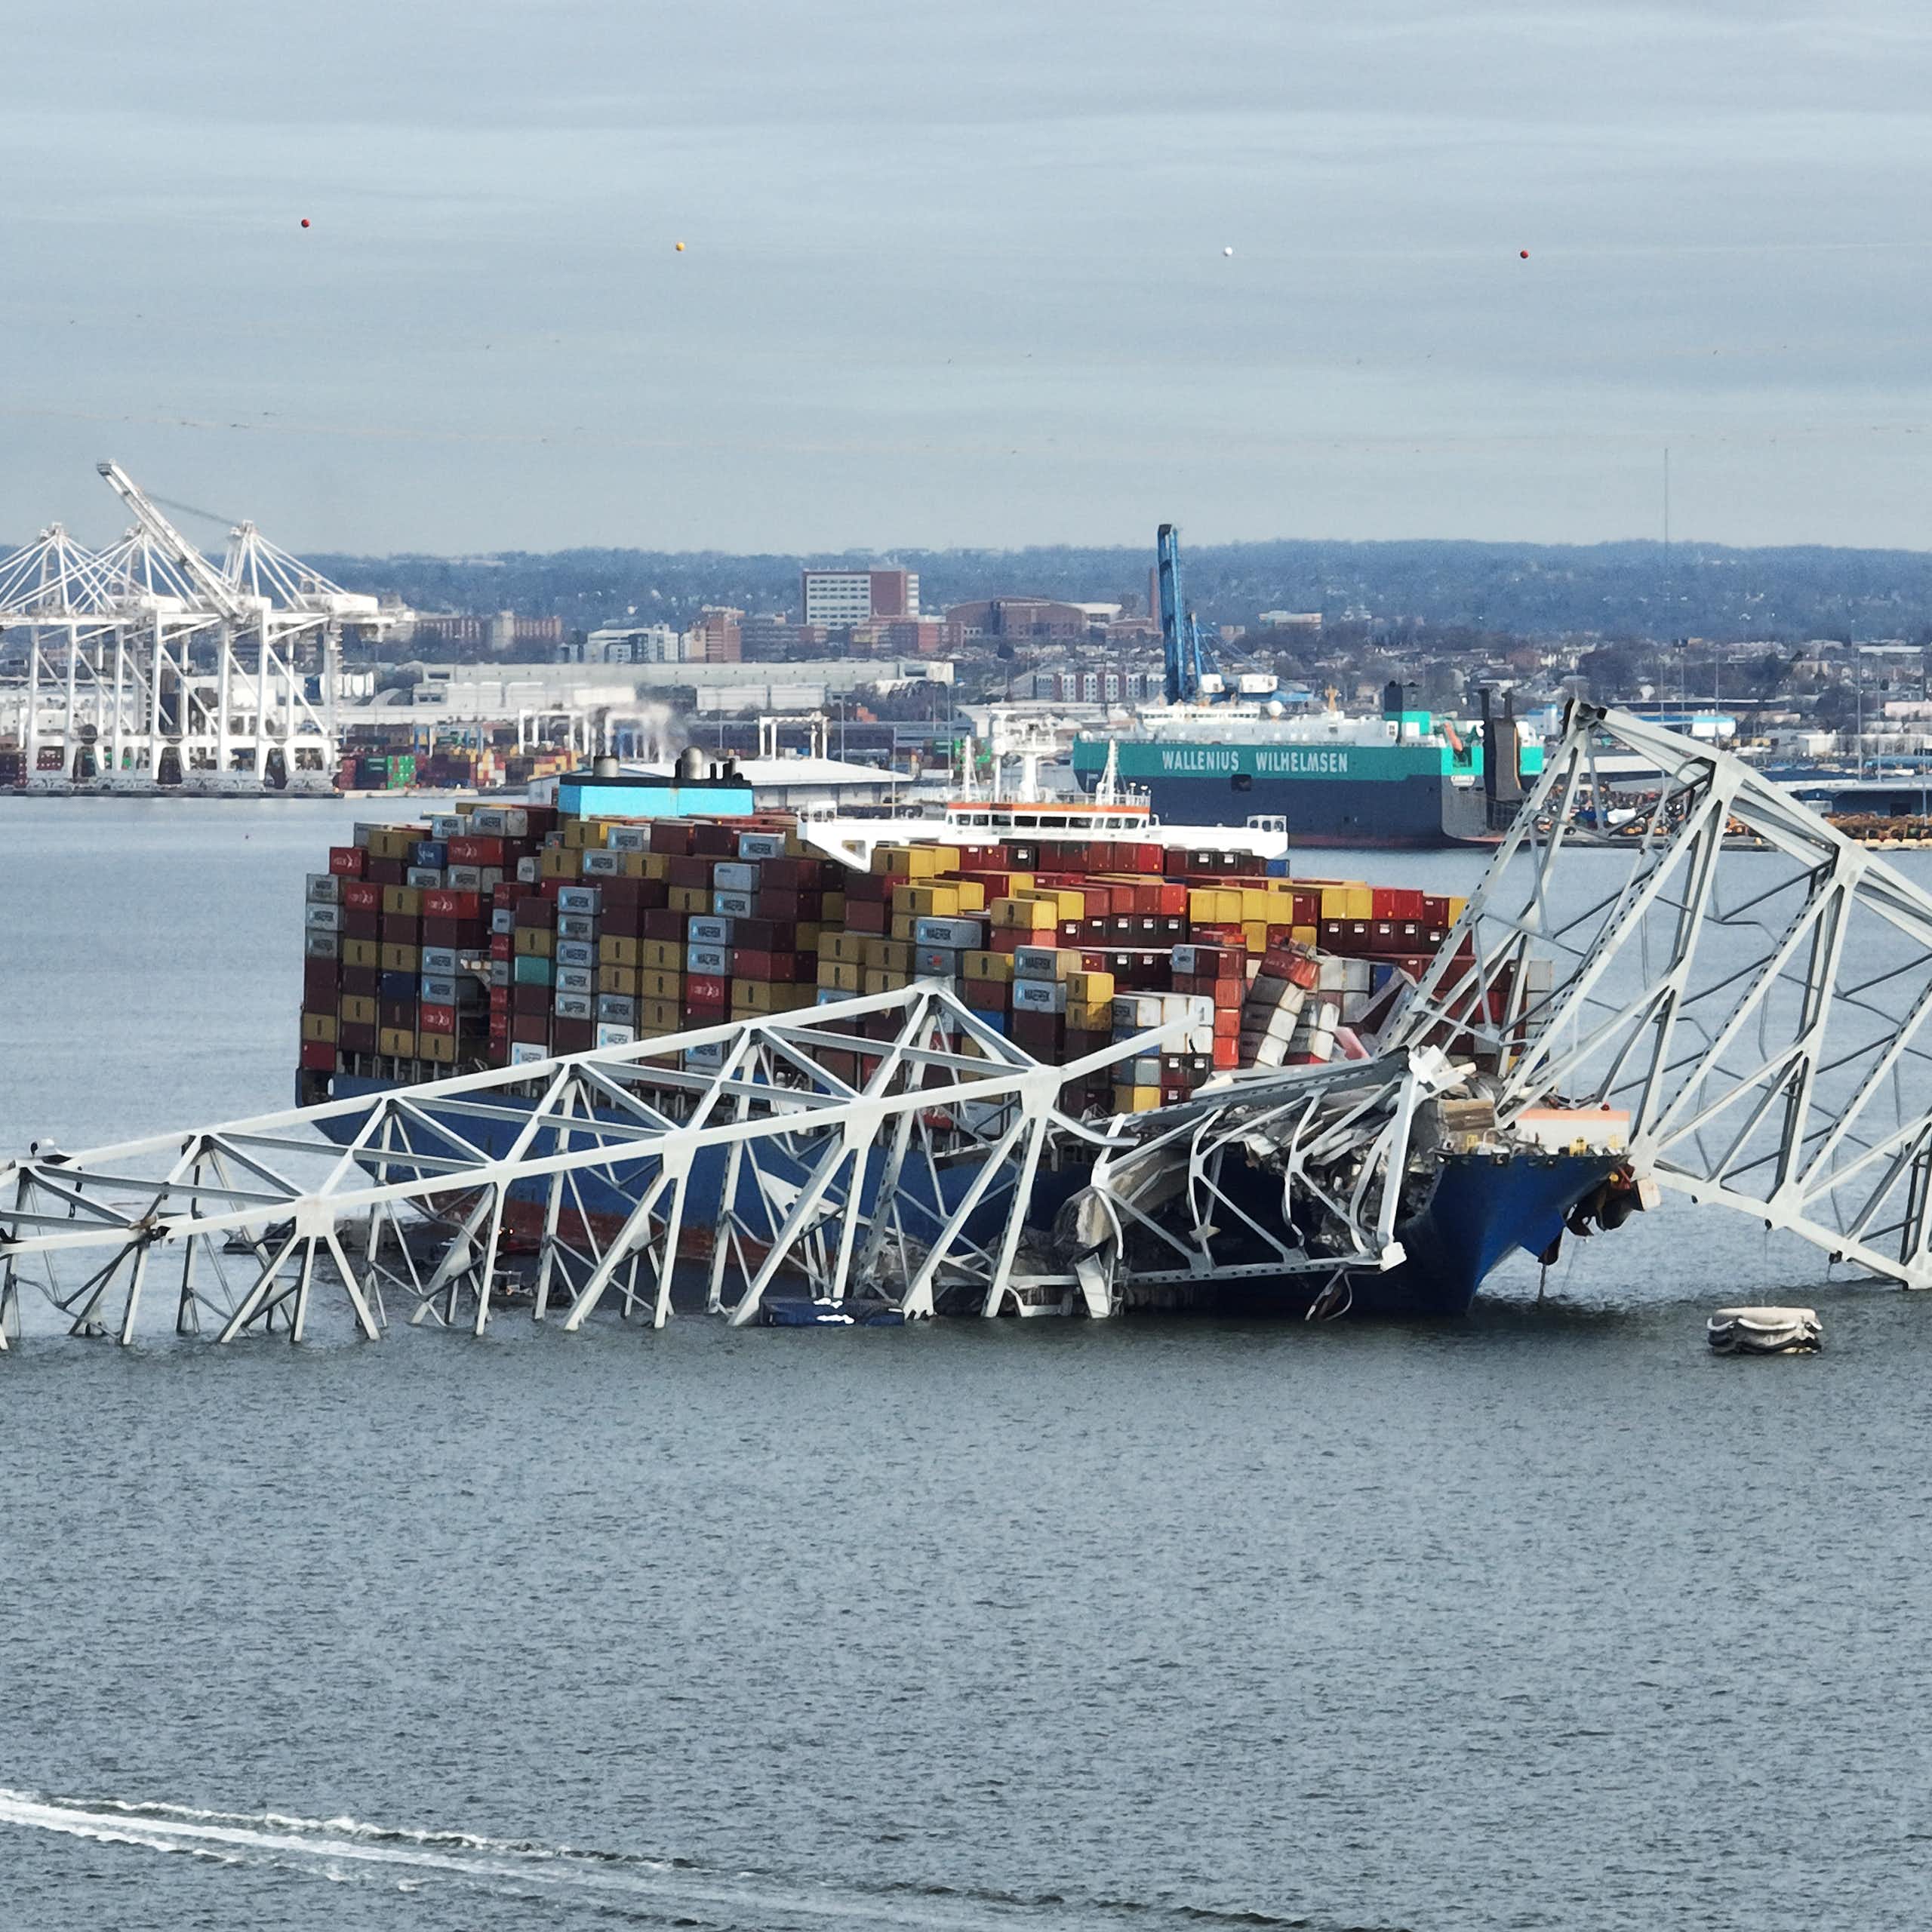 A cargo ship is ensnared in a mangled steel bridge.